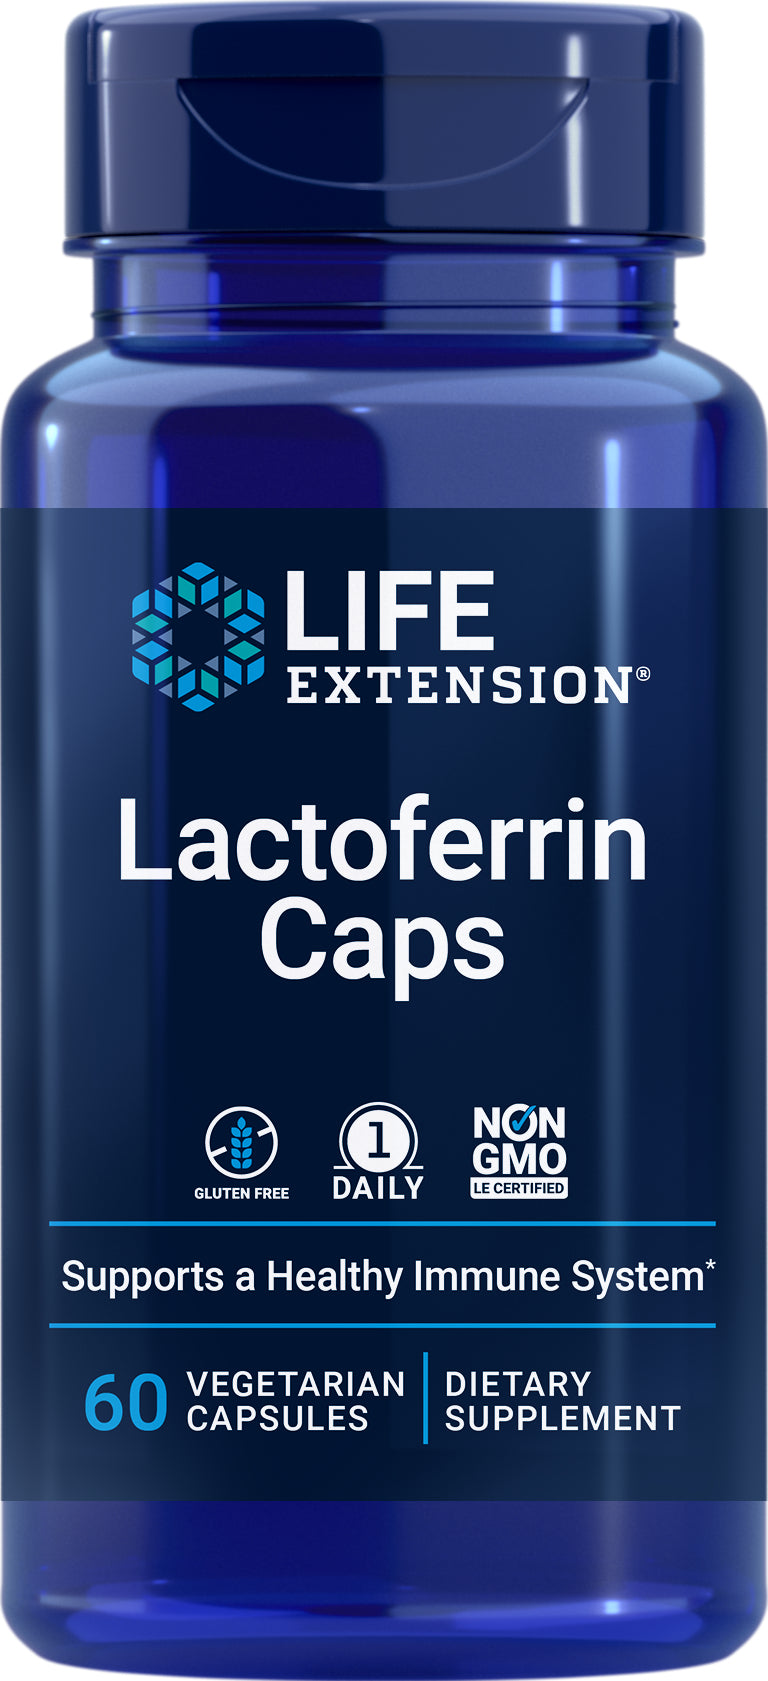 Lactoferrin Caps 620 mg, 100 vegetarian capsules by Life Extension